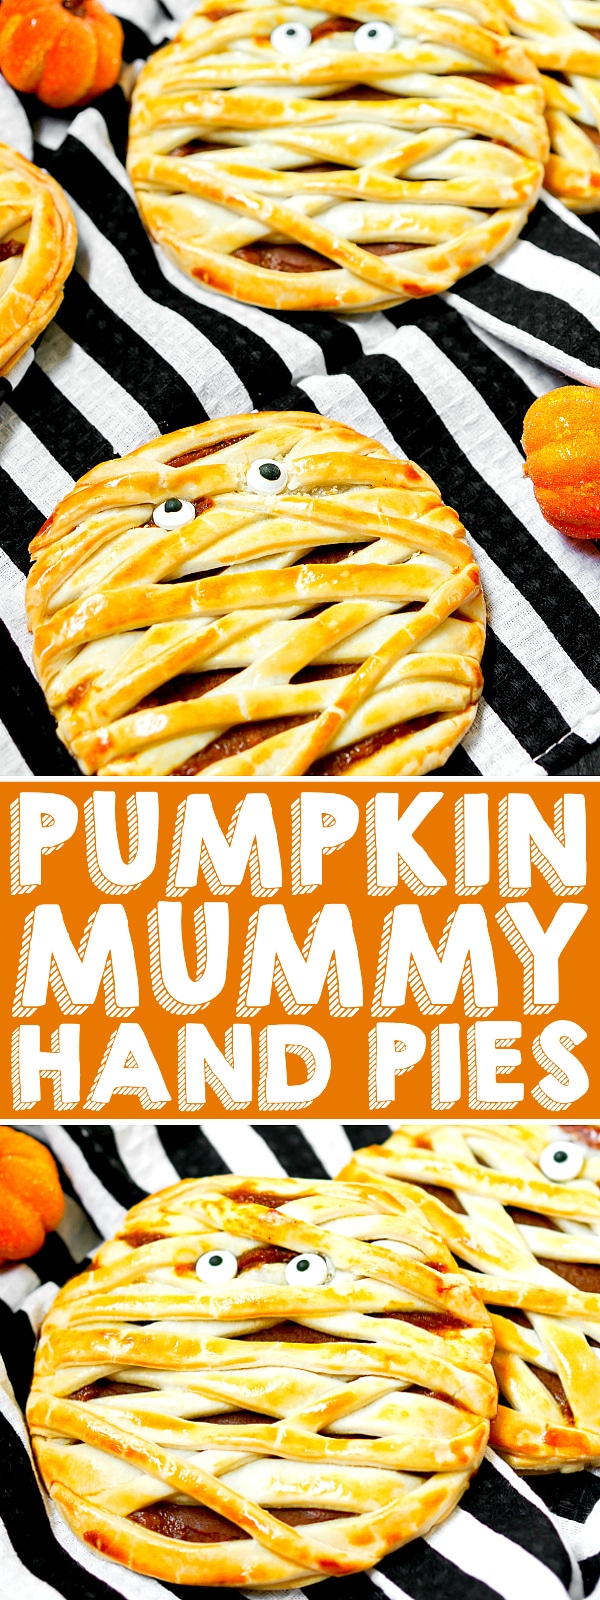 Trick or Treat! Pumpkin Mummy Hand Pies make an adorable Halloween dessert! The adults will love the classic pumpkin pie flavor and kids will love the cute mummy twist! Plus, they're an easy recipe to serve and take with you! | The Love Nerds #halloweendessert #pumpkinrecipe #handpierecipe